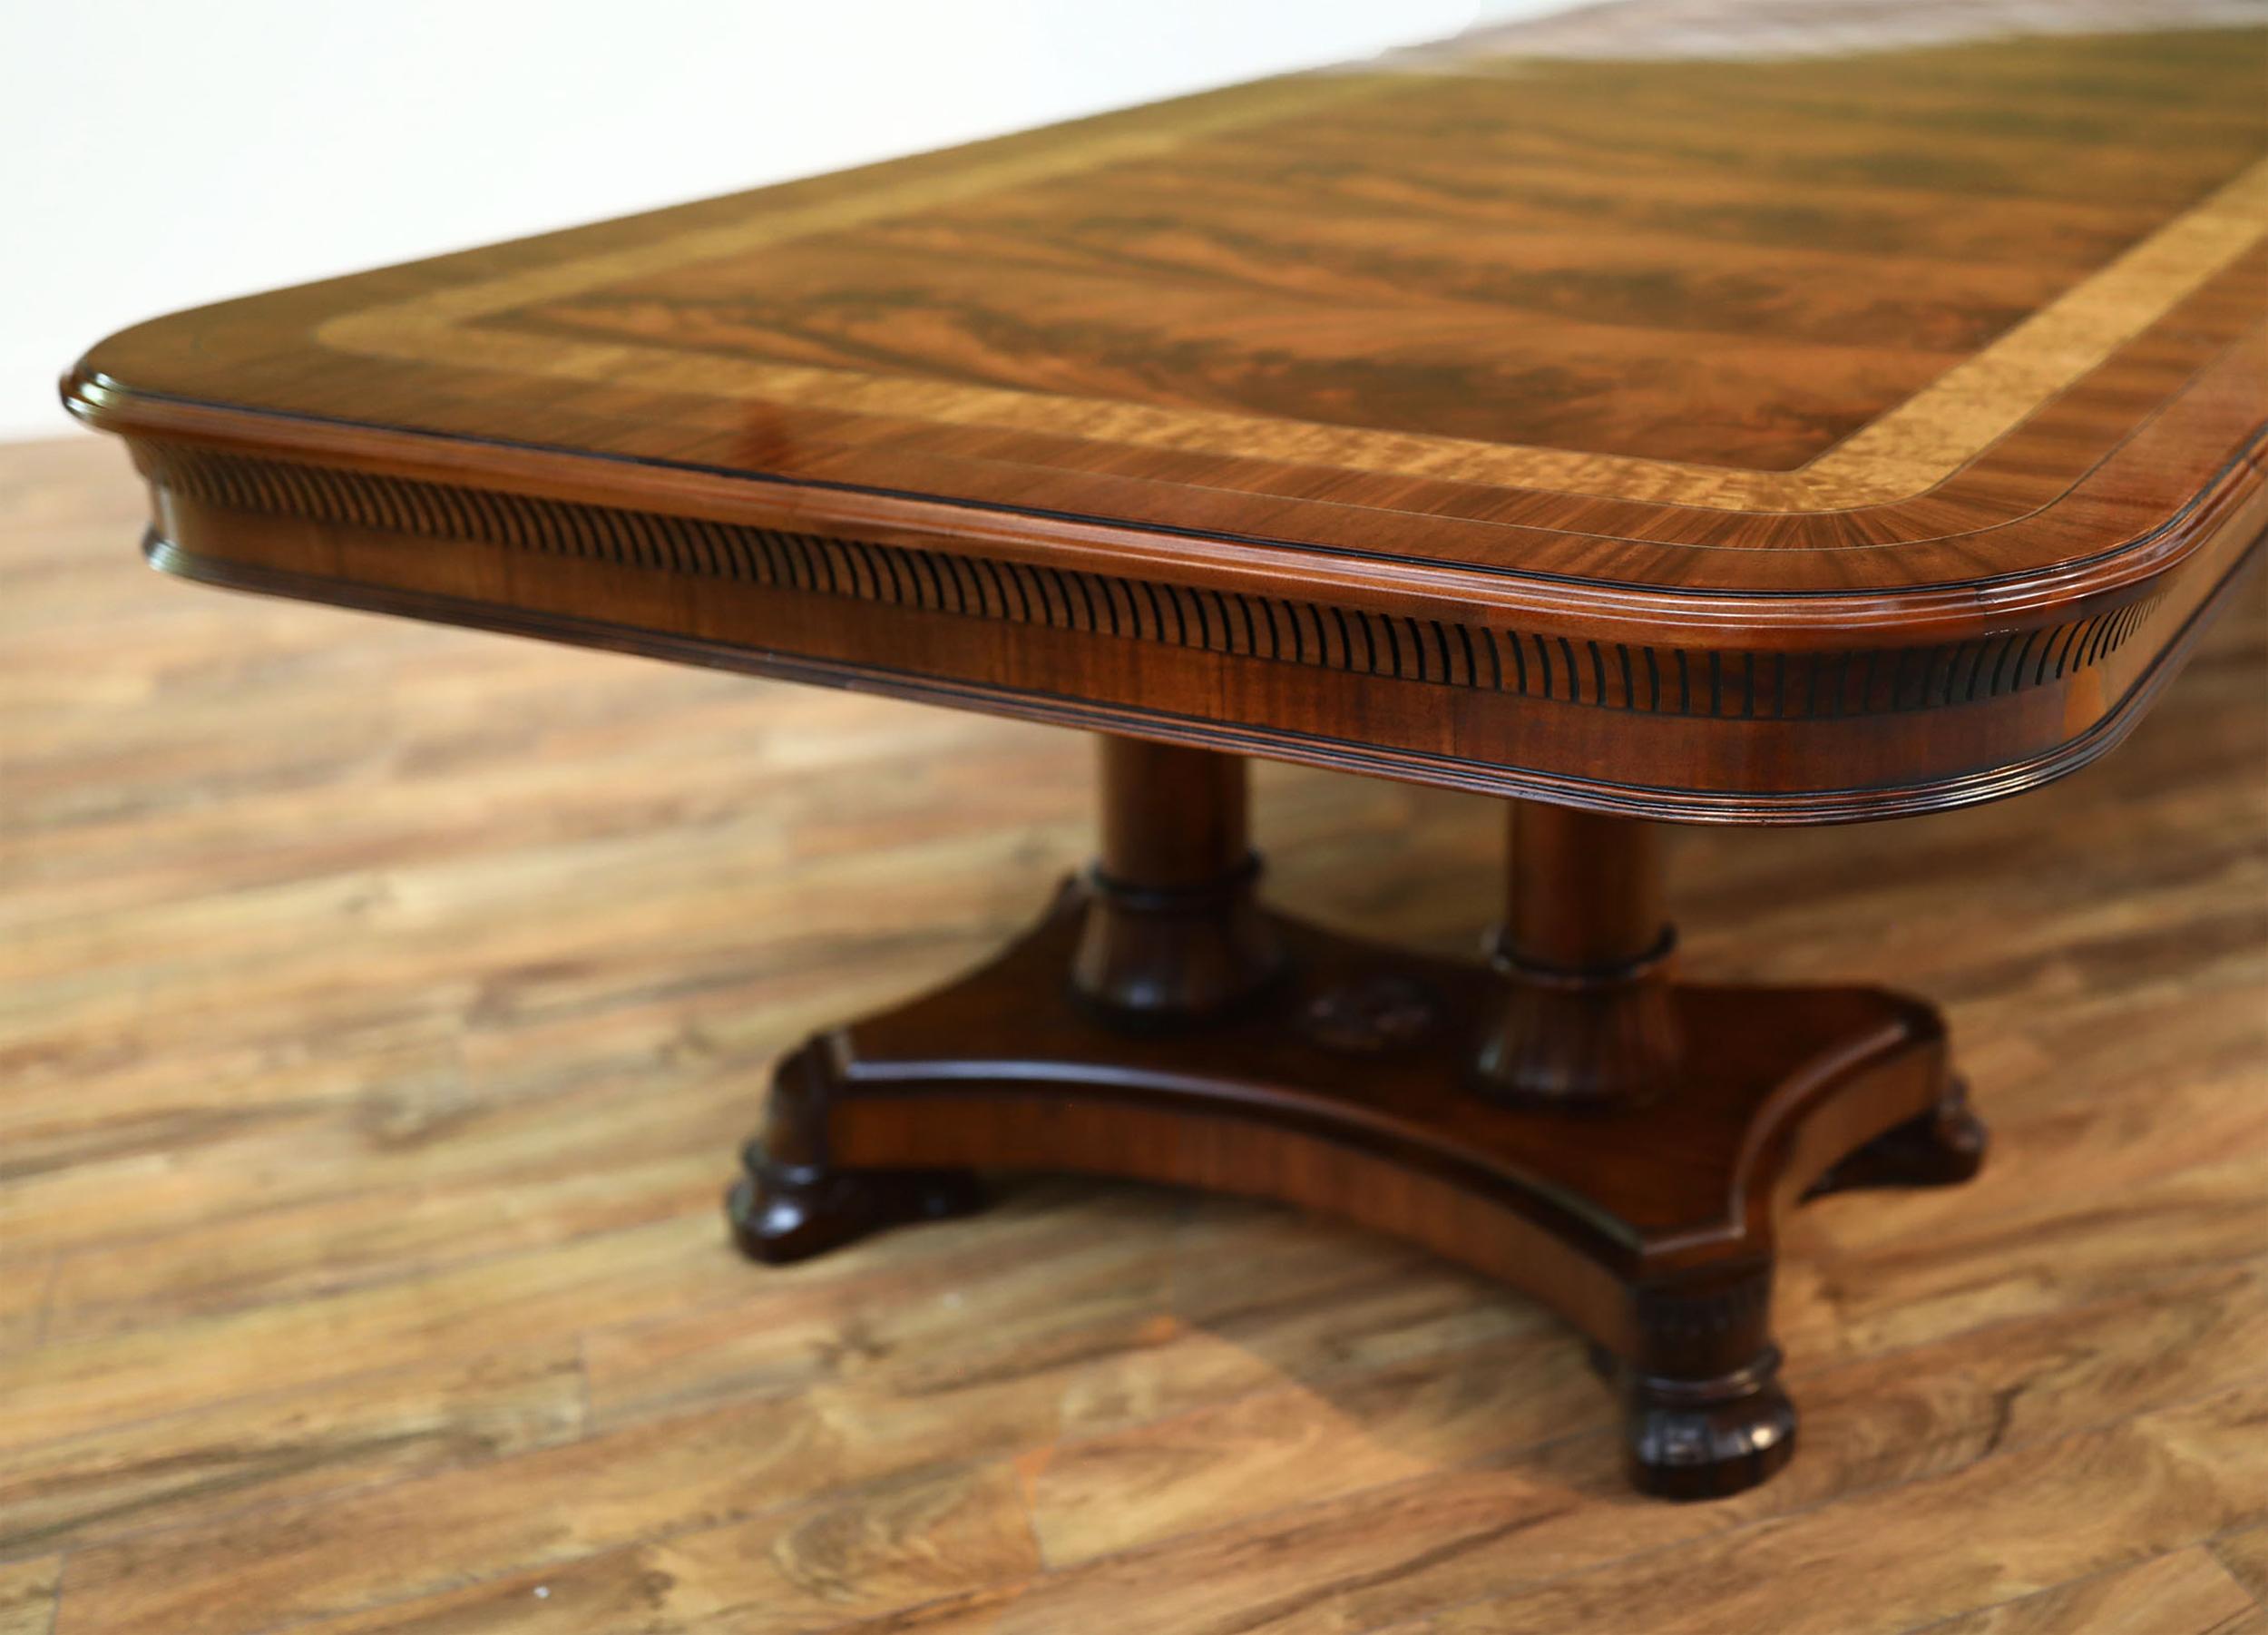 This is made-to-order large mahogany dining table made in the Leighton Hall shop. This is one of our flagship tables and is known as the King Demure dining table. It has a transitional design inspired by the original 18th century Regency style